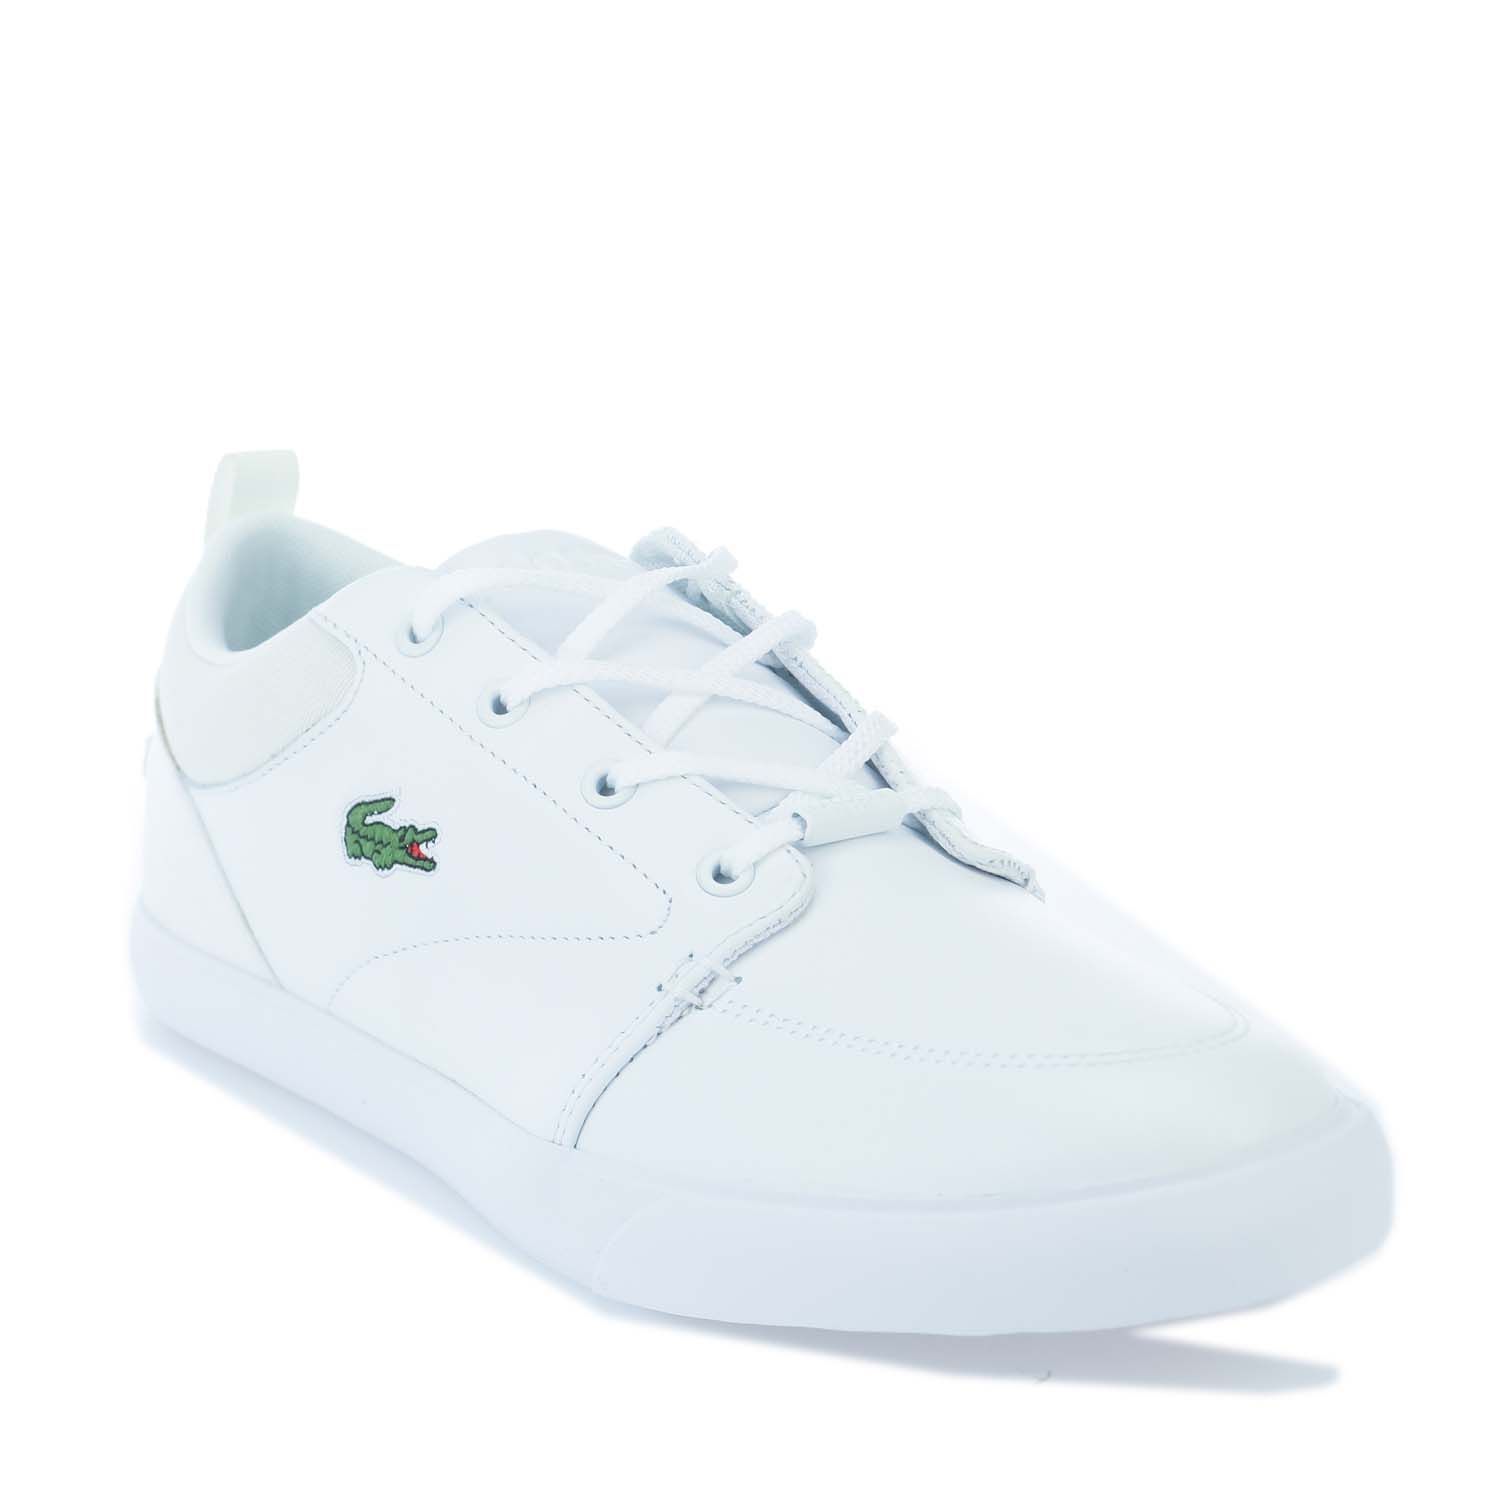 Mens Lacoste Bayliss Trainers in white.- Synthetic leather upper.- Lace up fastening.- Lace detail to the heel.- Ortholite® insole.- Tonal embroidered tongue branding.- Embroidered branding. - Rubber sole.- Leather upper  Textile lining  Synthetic sole.- Ref: 743CMA004821G